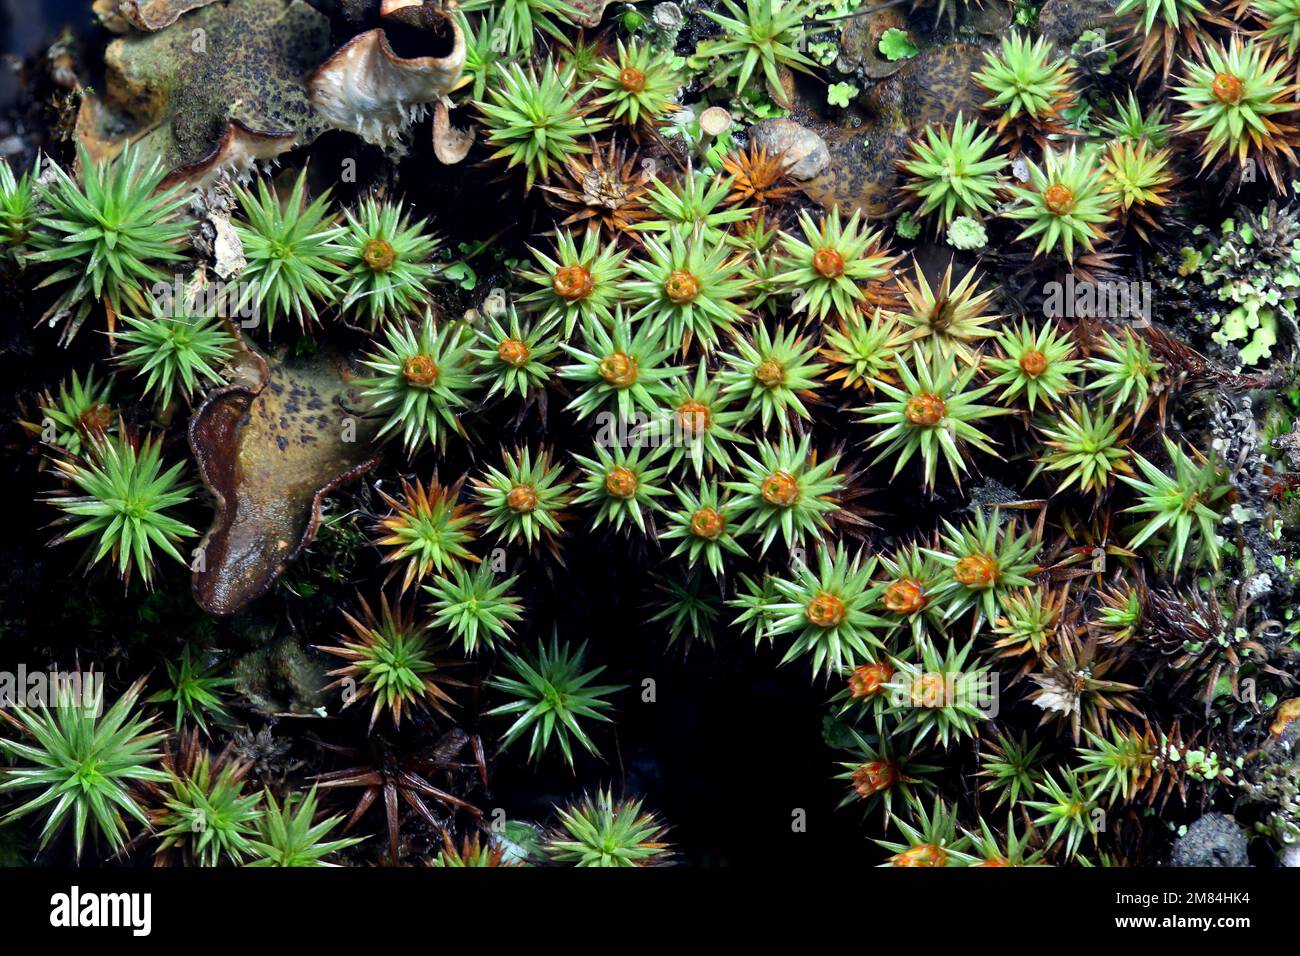 Haircap moss (Polytrichum piliferum), artistic composition.  This is a very popular moss in moss gardens. Stock Photo